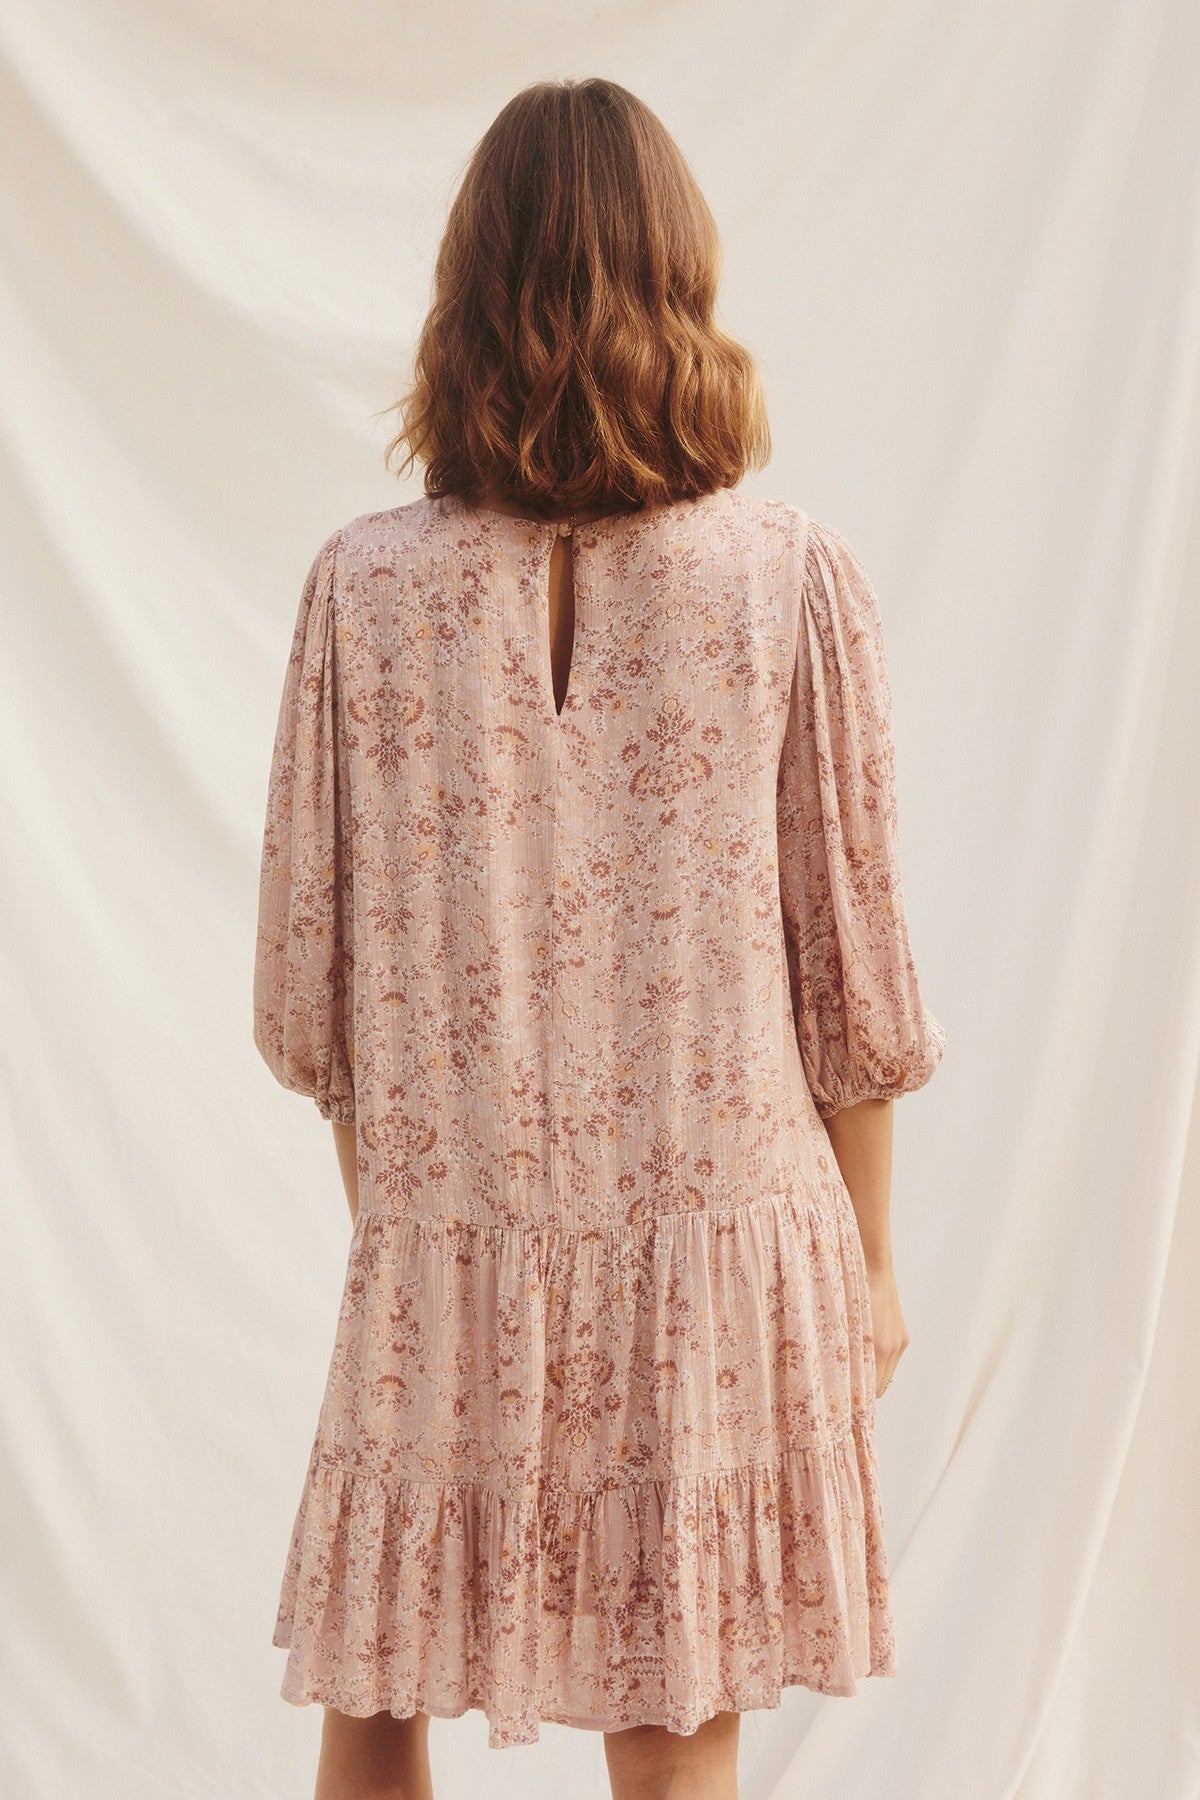 The Paisley Dress in Dusty Blush